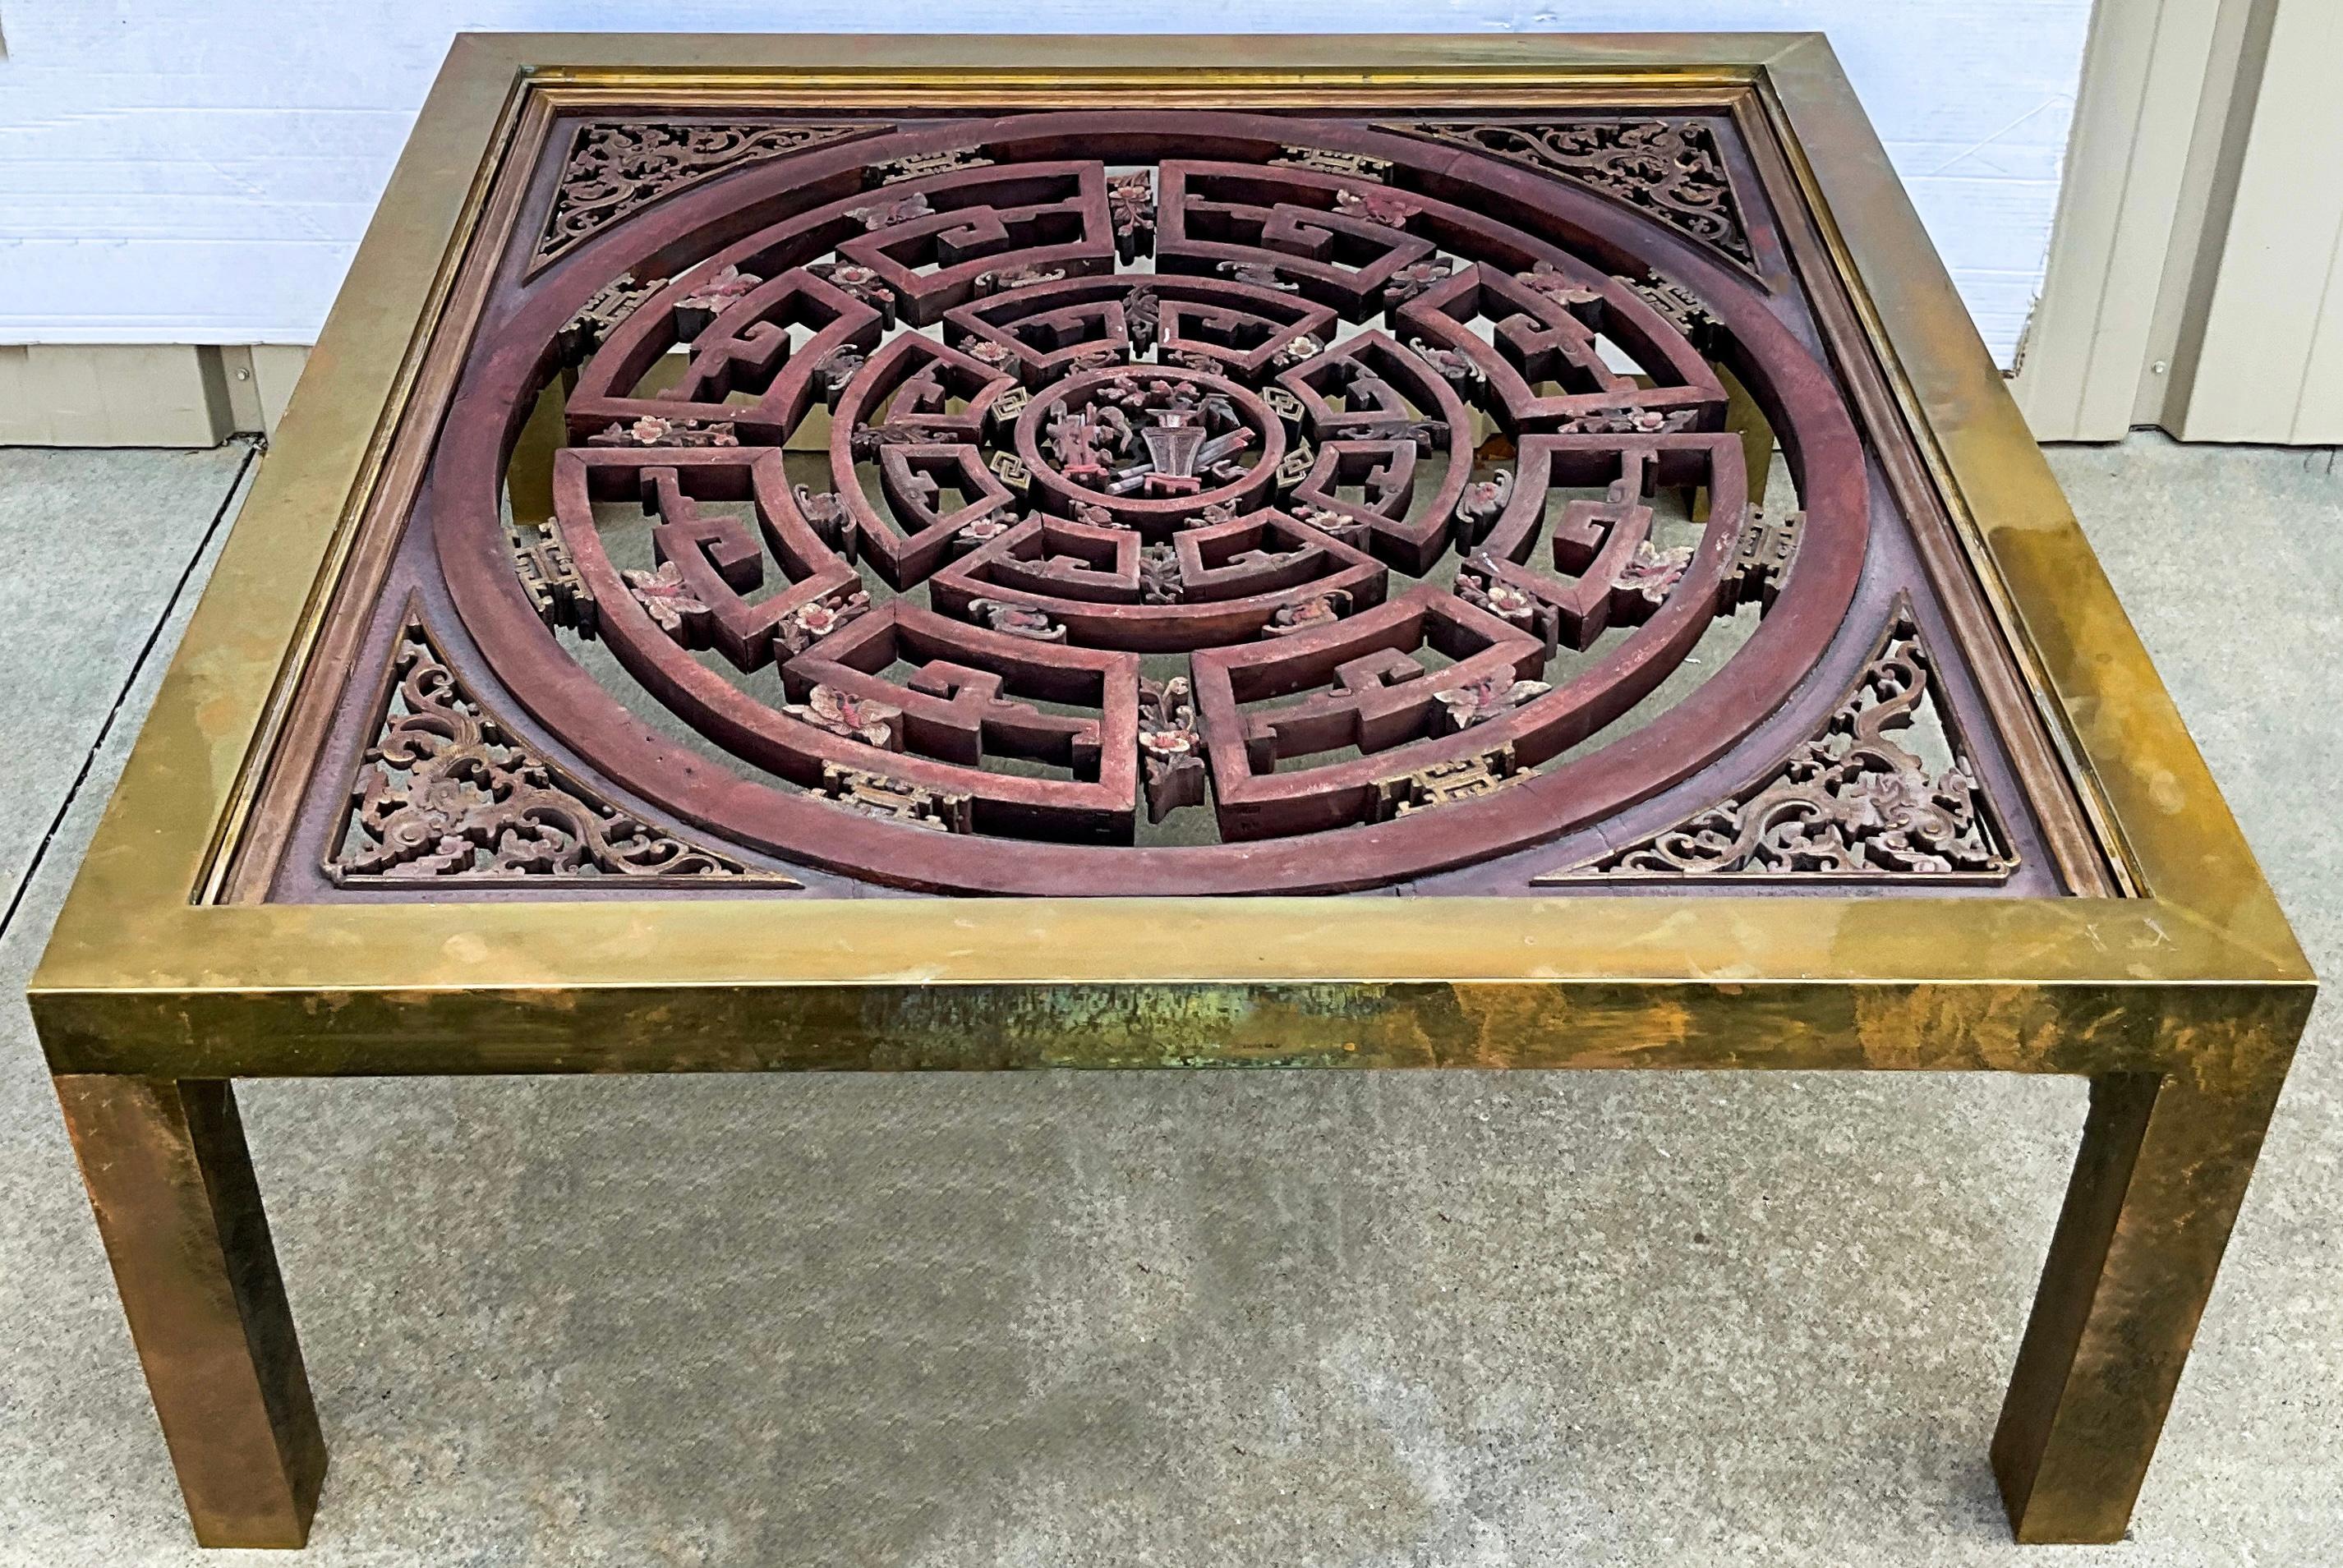 This is mid-century modern James Mont style brass and carved wood coffee table with Asian influences. The juxtaposition of the brass frame with the large scale carved medallion give it strong decorative appeal! The brass is notably tarnished but in